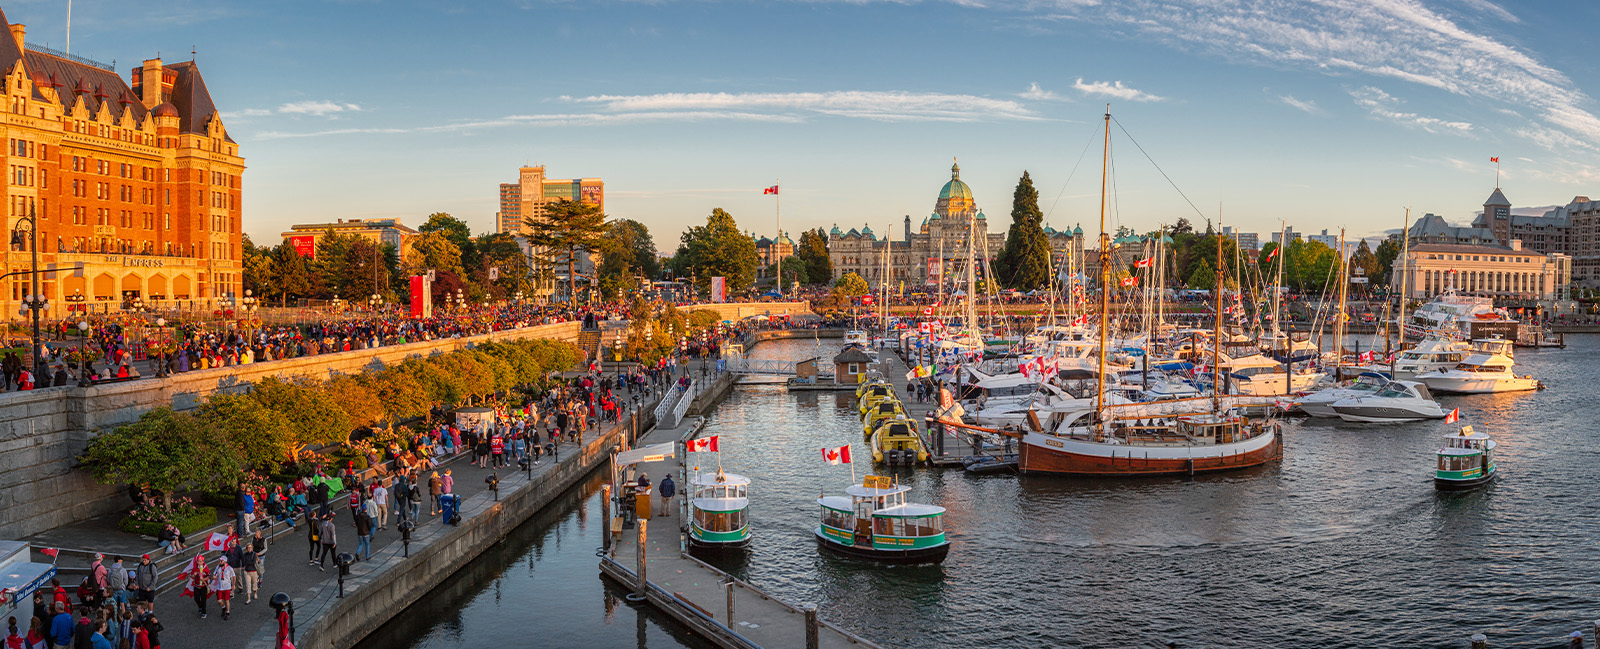 Canada-Day-in-Victoria-Vancouver-Island-Canada.-Masses-of-people-visiting-the-celebrations-at-inner-harbour-with-the-parliament-building-during-sunset